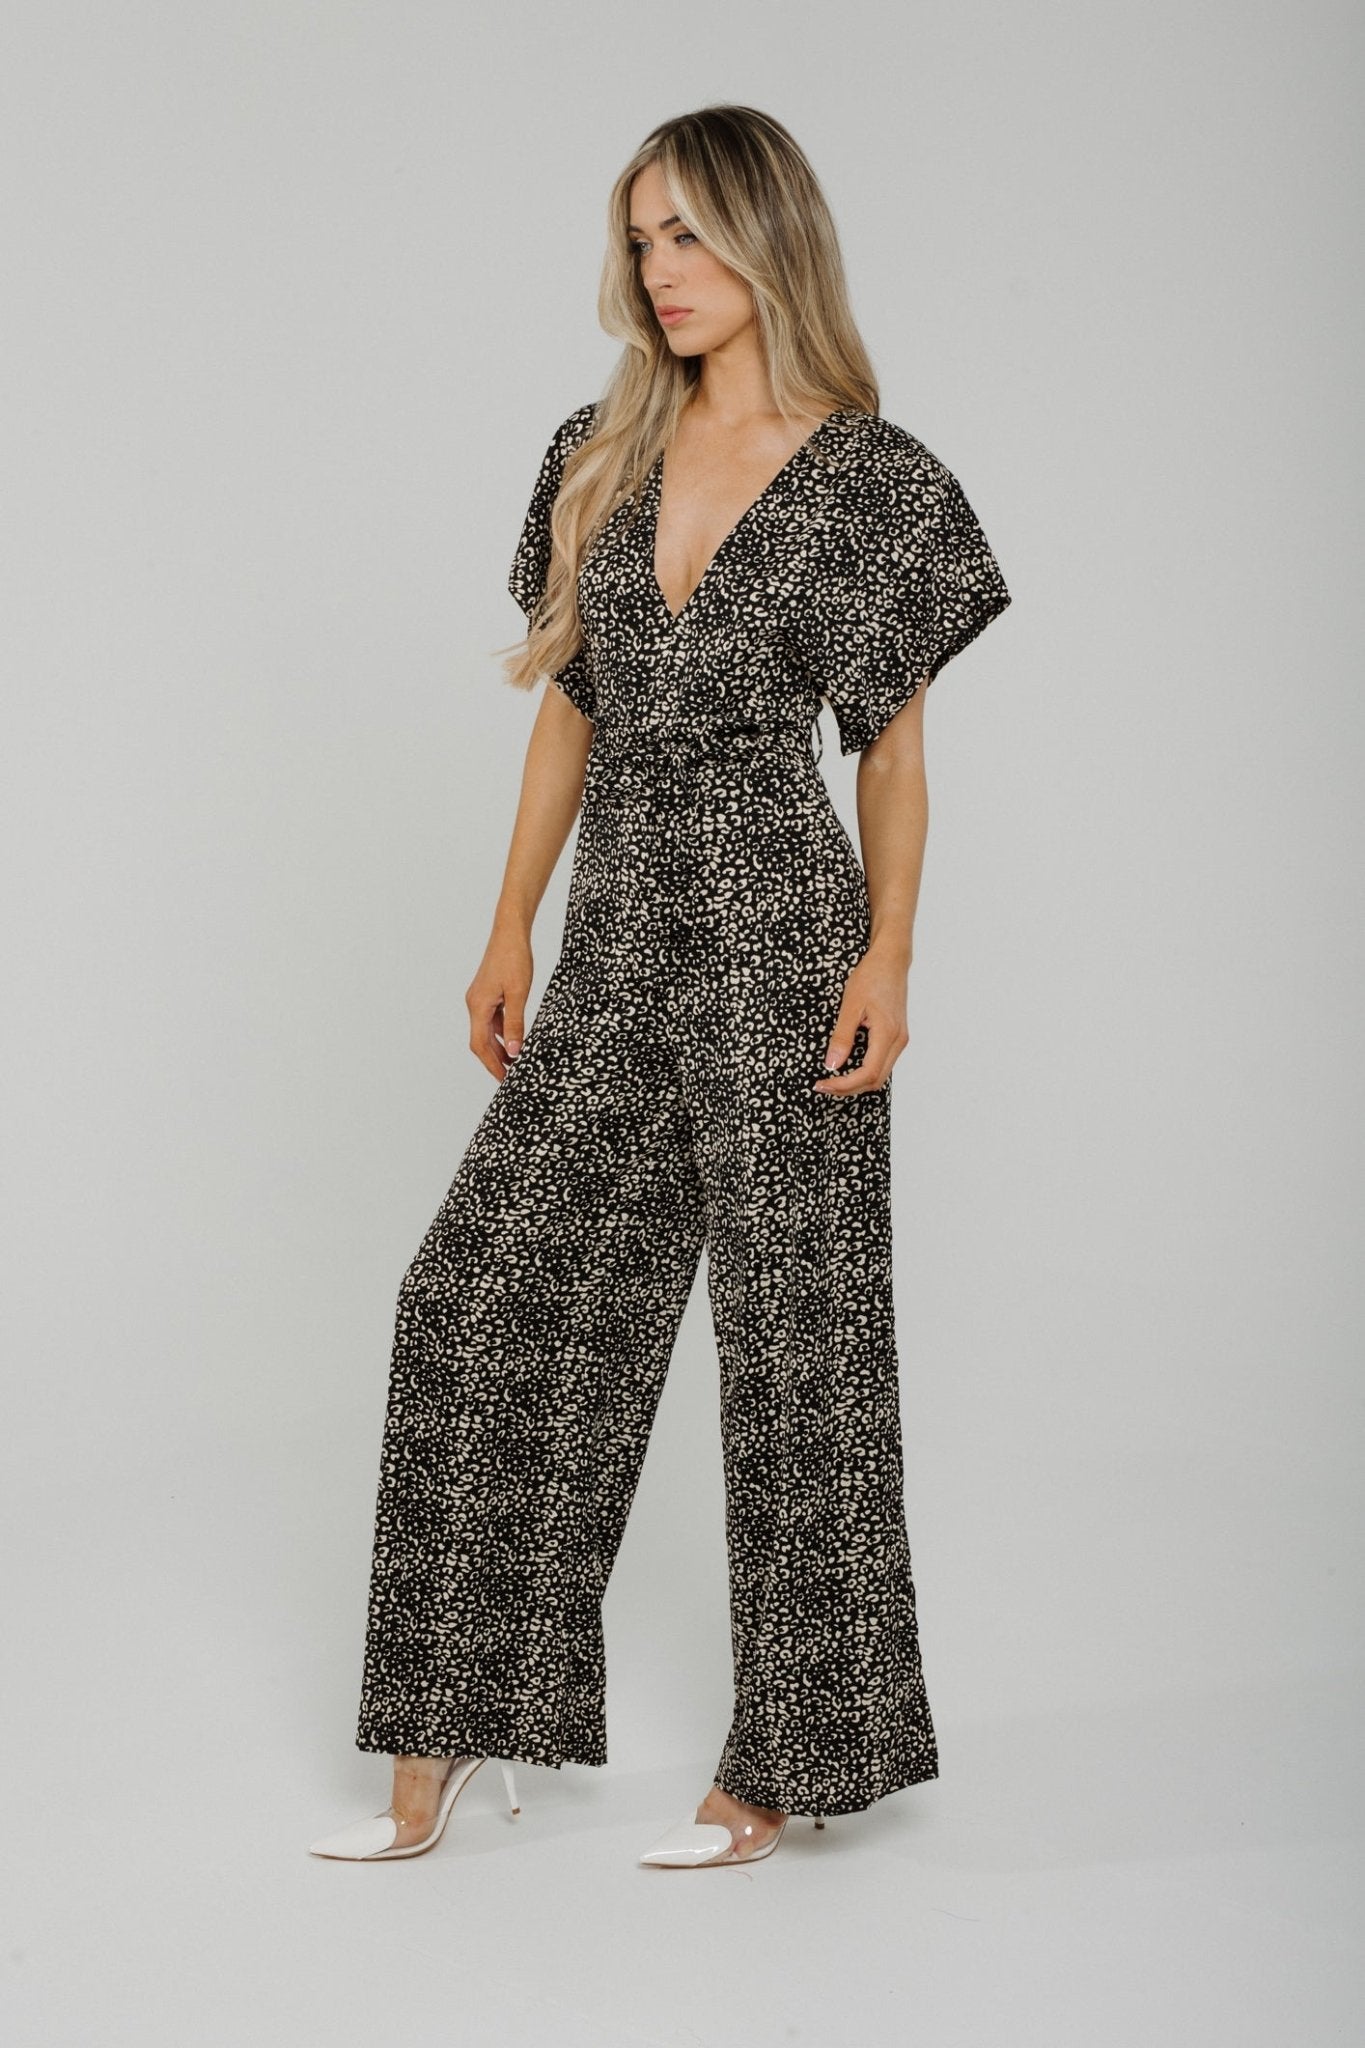 Polly Printed Jumpsuit In Black & Neutral - The Walk in Wardrobe